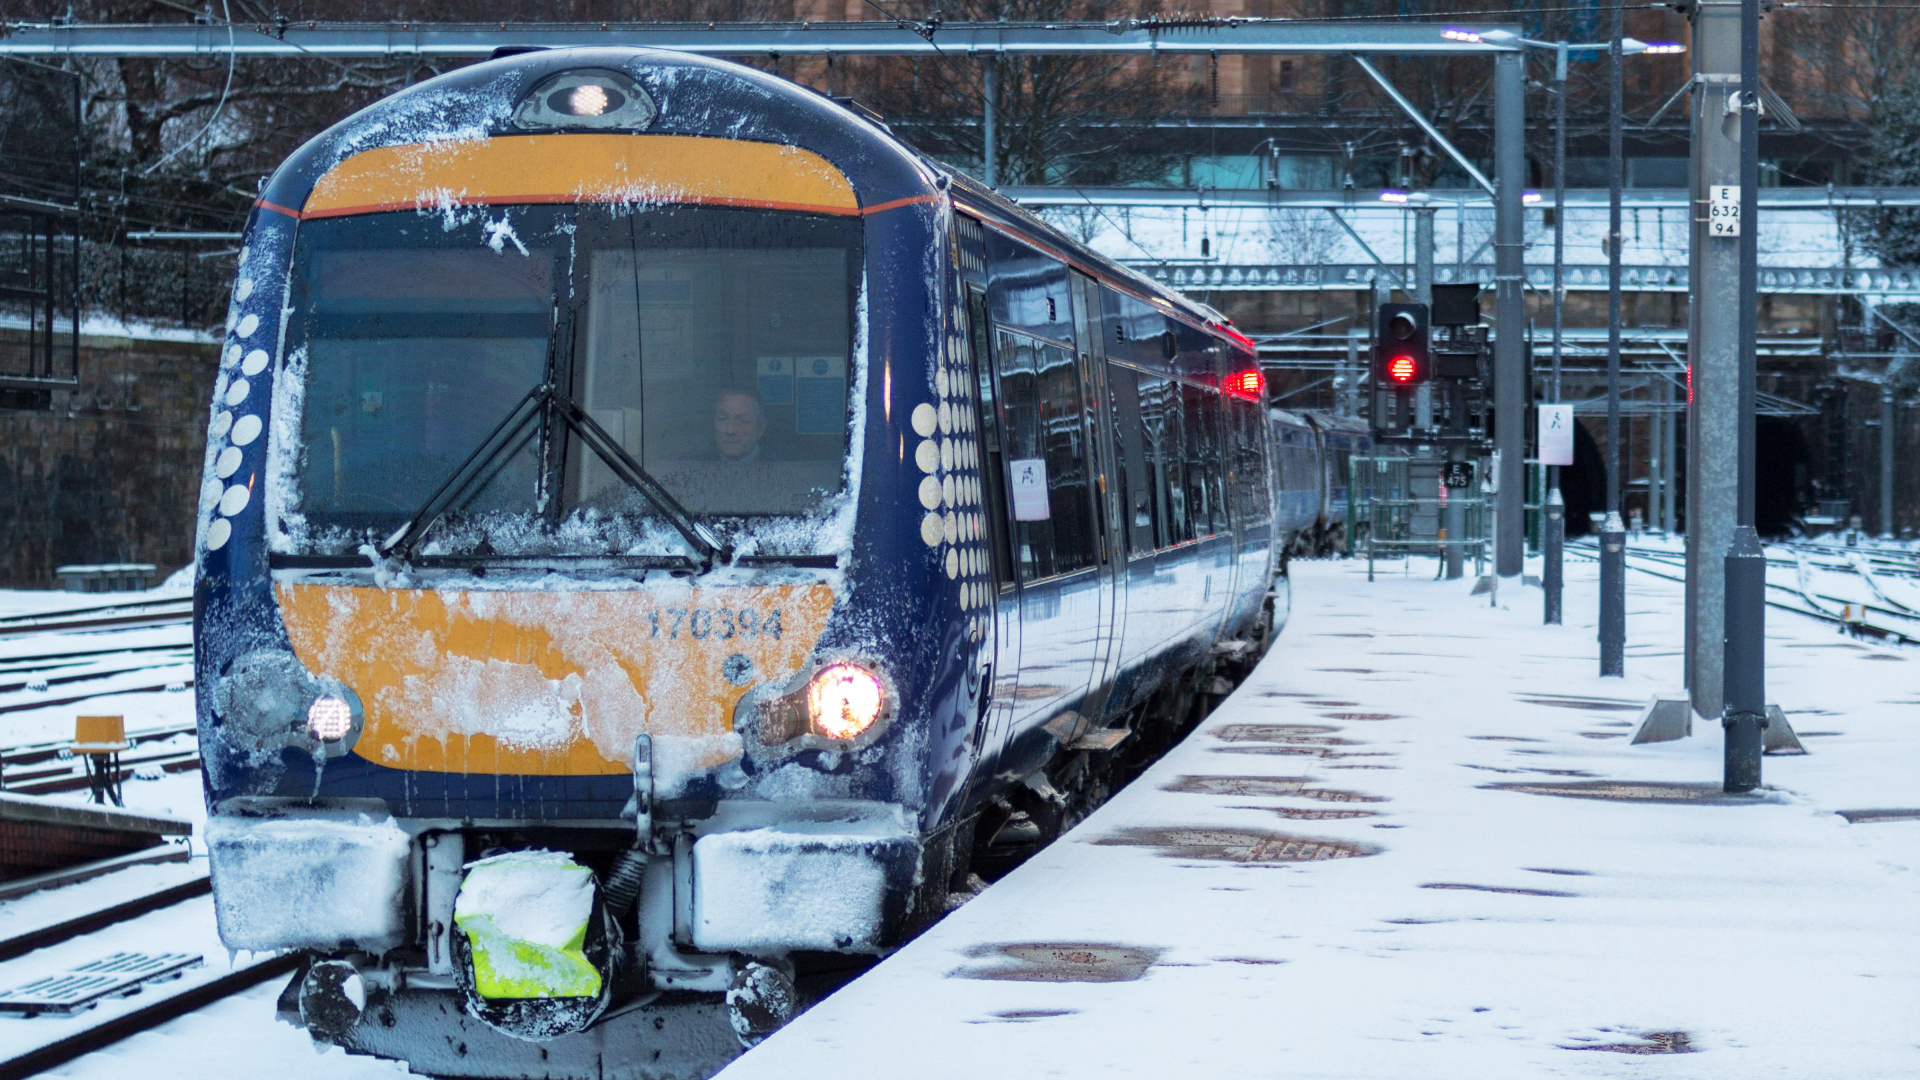 The original date for works to be undertaken would have impacted commuters across Fife, Perth, Dundee and Aberdeen during the busy Christmas period.